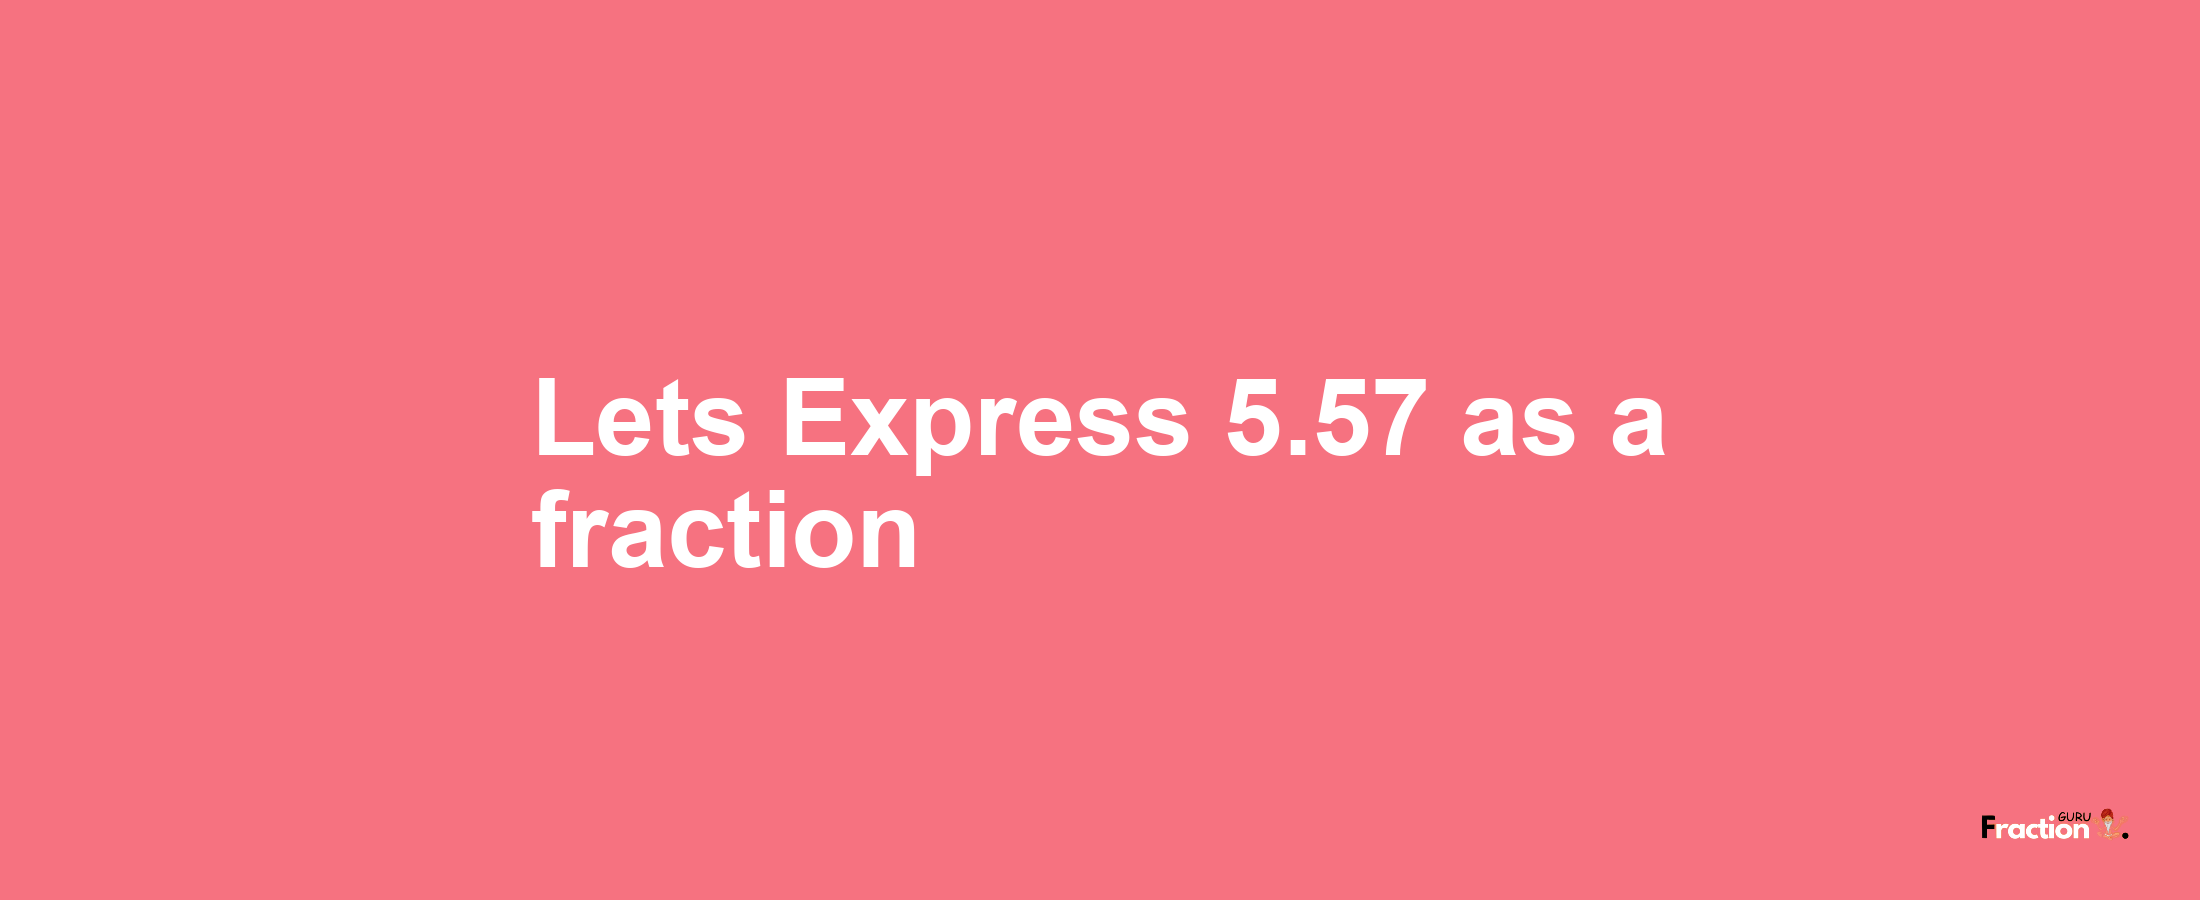 Lets Express 5.57 as afraction